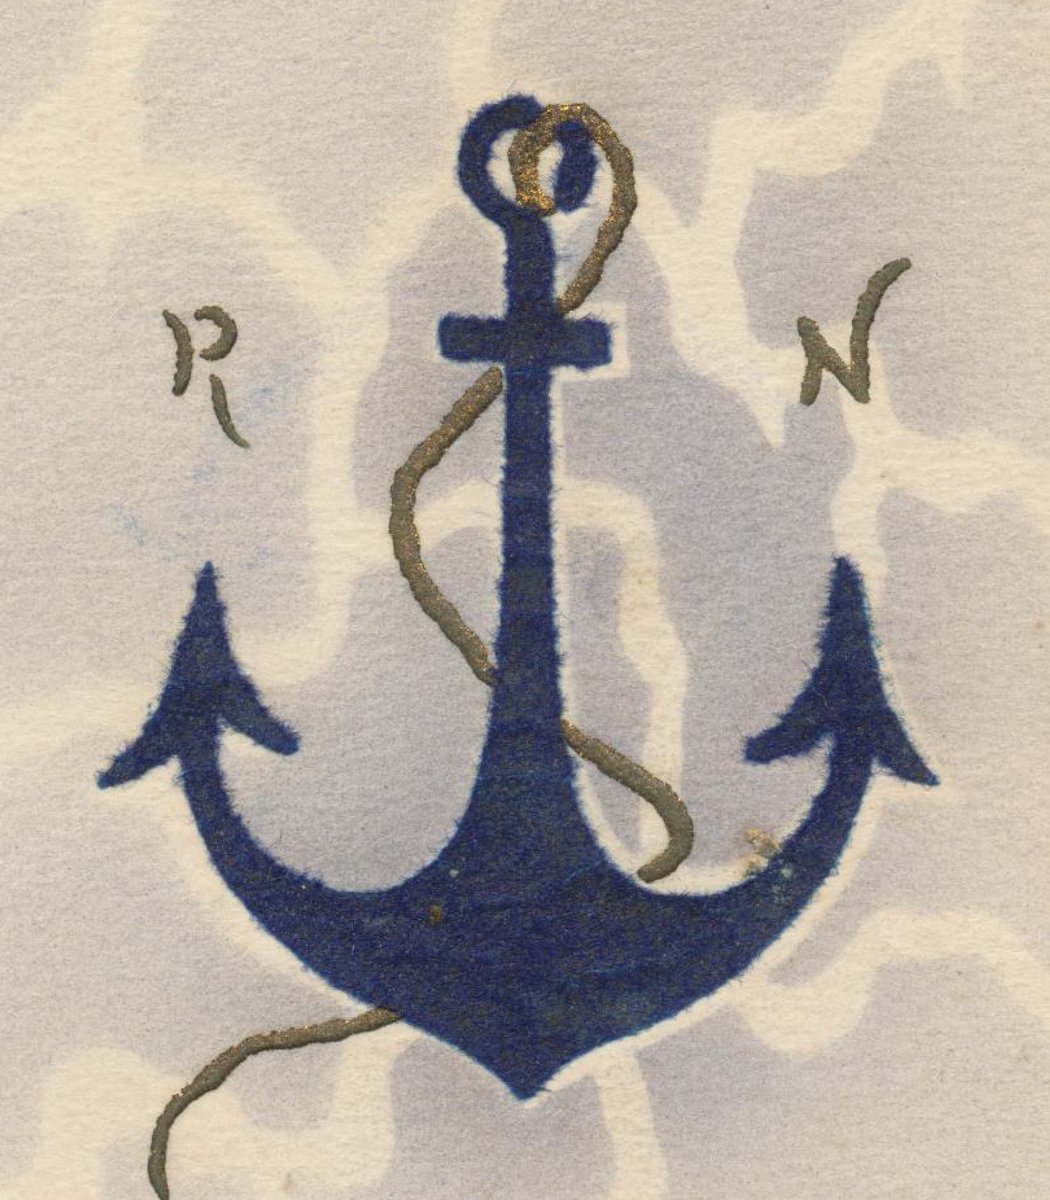 In Patriot Games, Sean is impaled on an anchor!We have this cute WWI-era postcard...